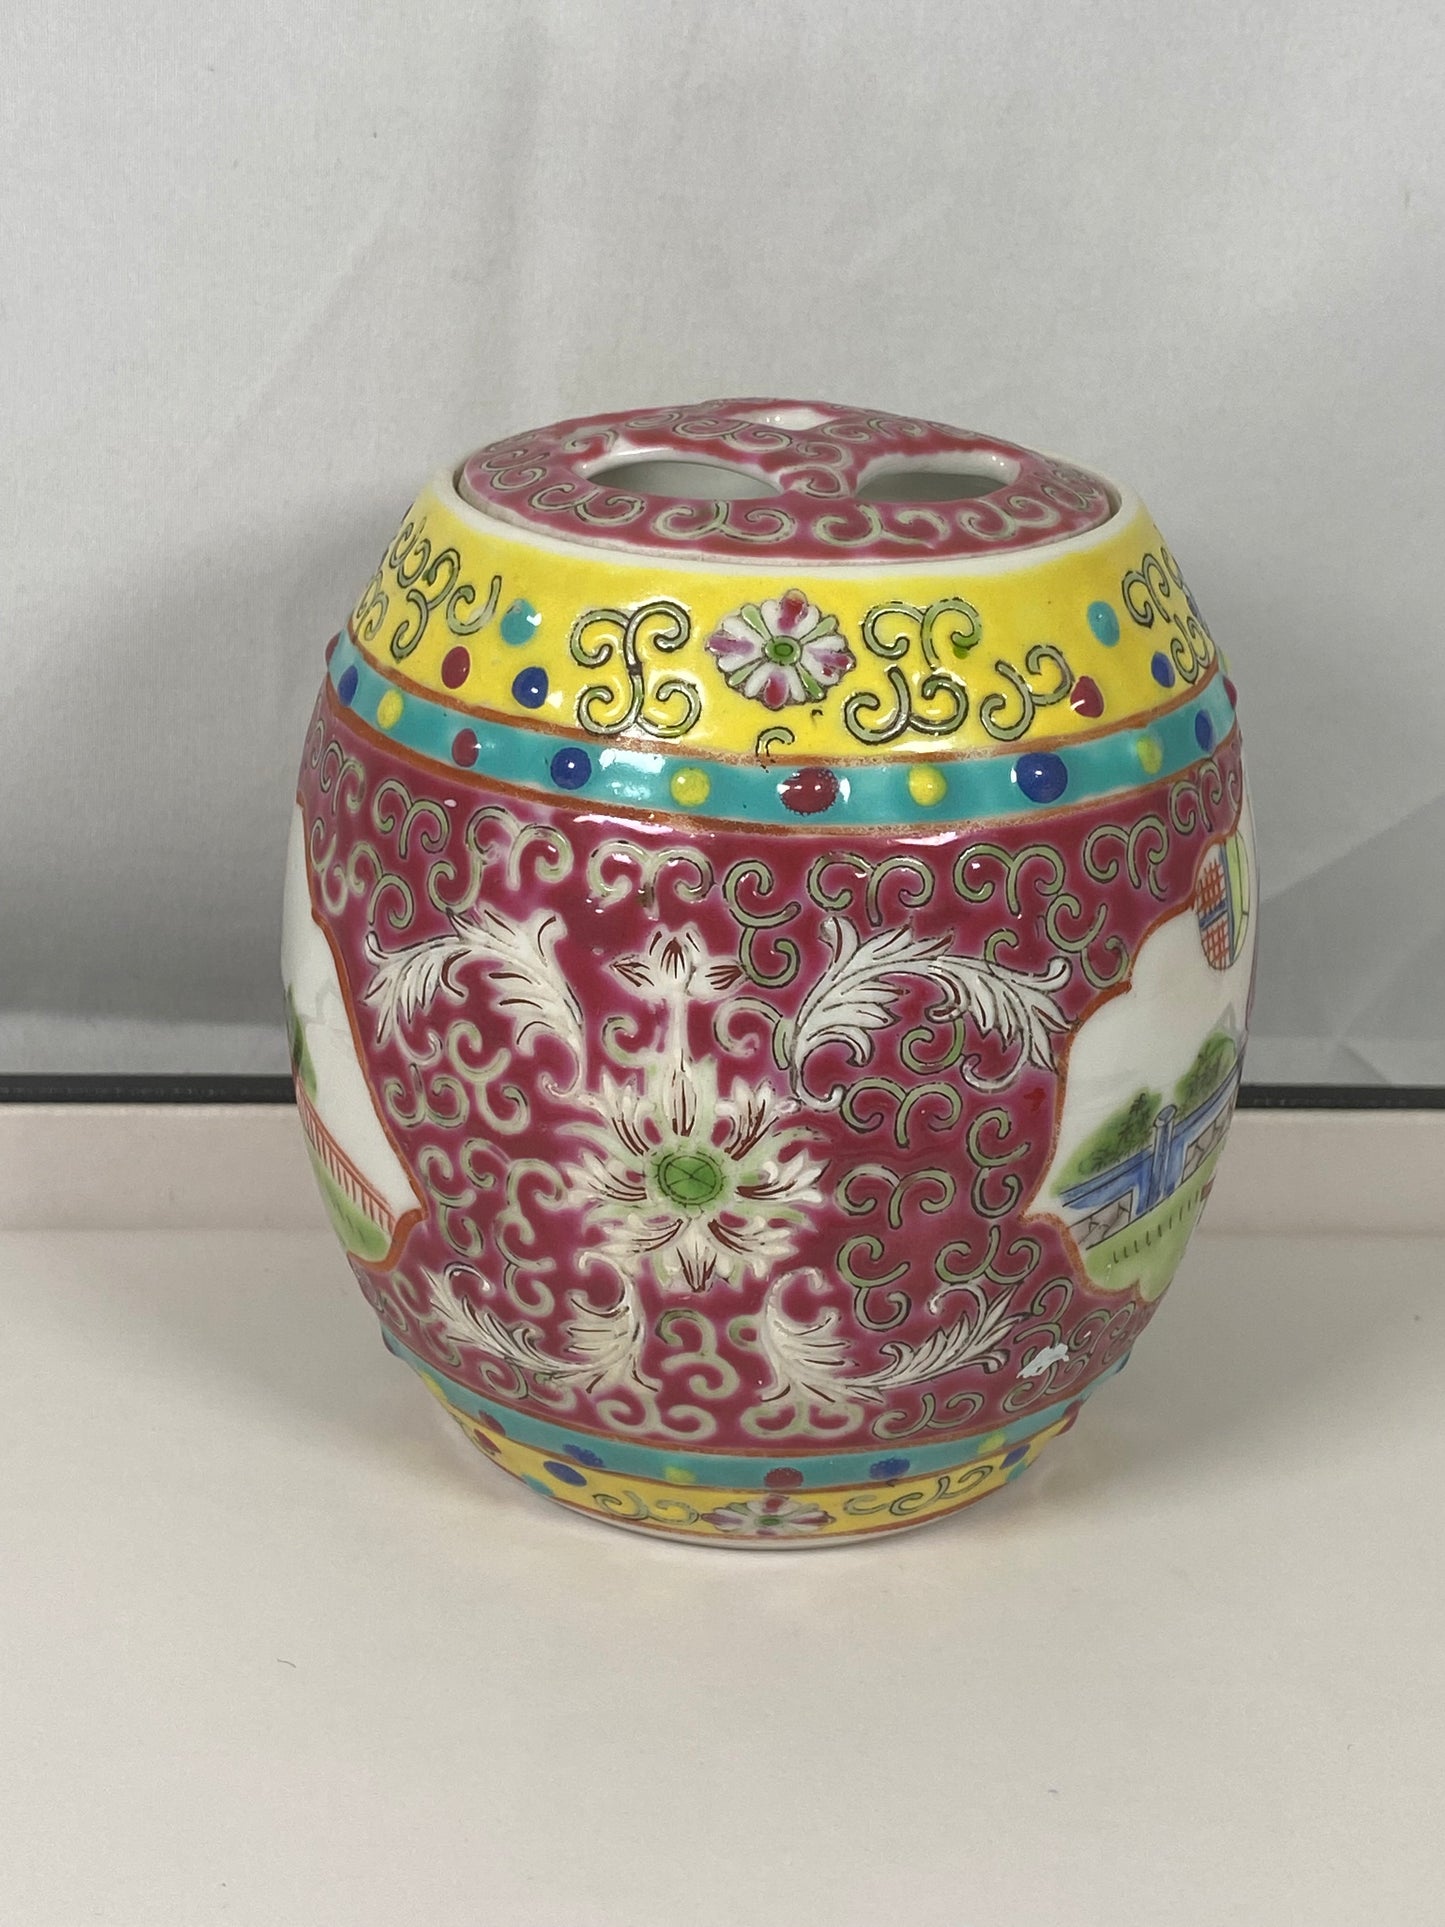 Rare Medallion Lidded Jingdezhen ginger jar, Amoy Canning Corporation circa late 1940s to 50s.